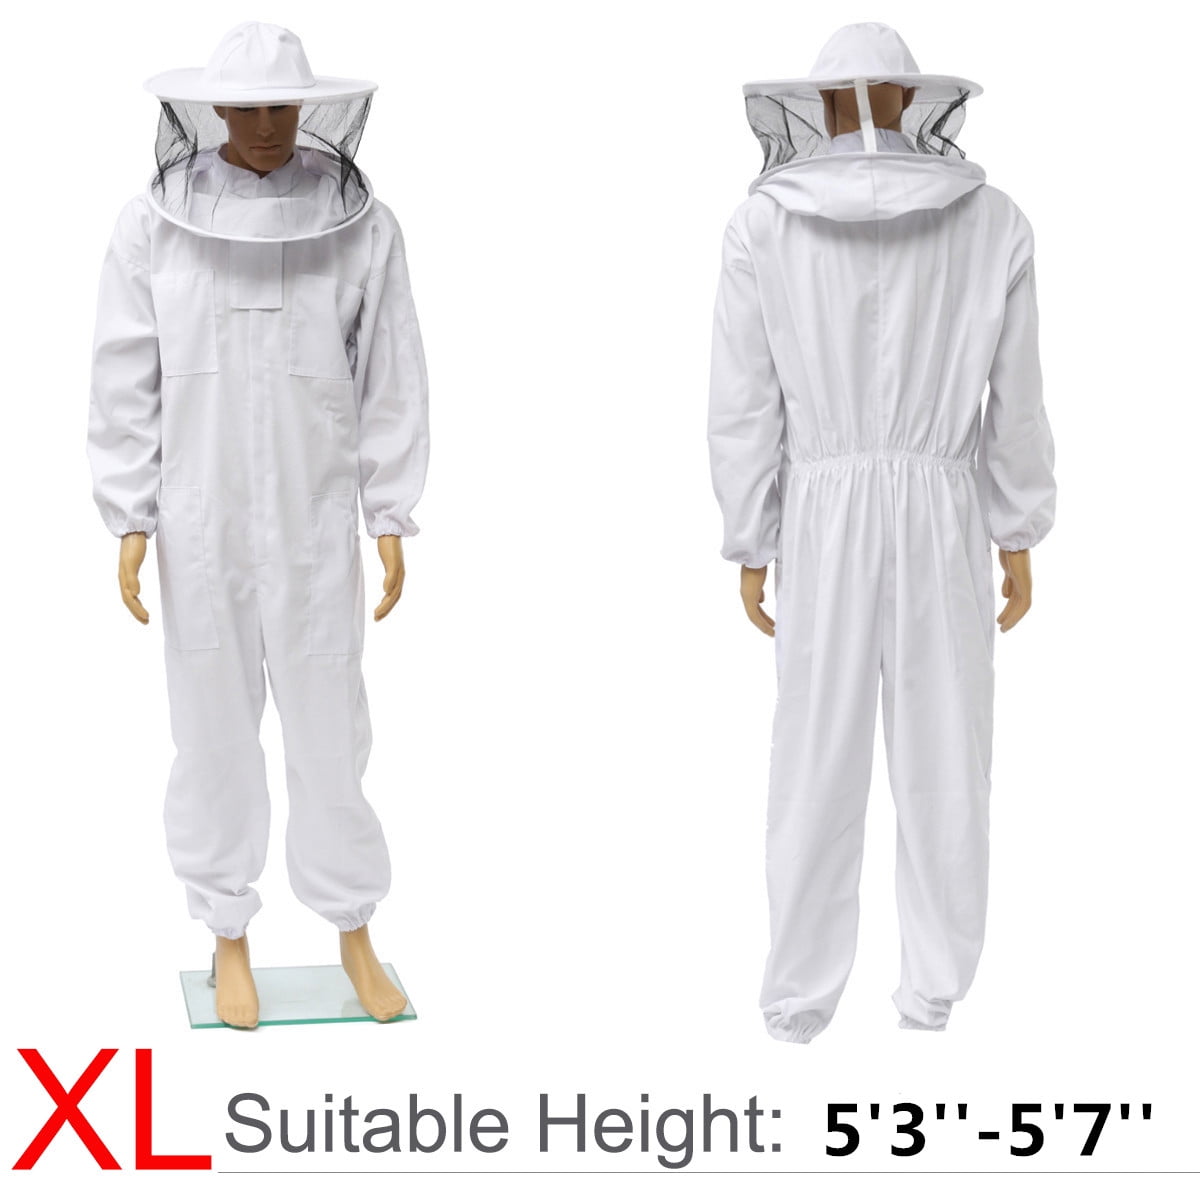 2XL F Fityle Unisex Beekeeper Costume Super Thick Beekeeping Suit Anti-wasp Fabric Elastic Cuffs Detachable Hat White